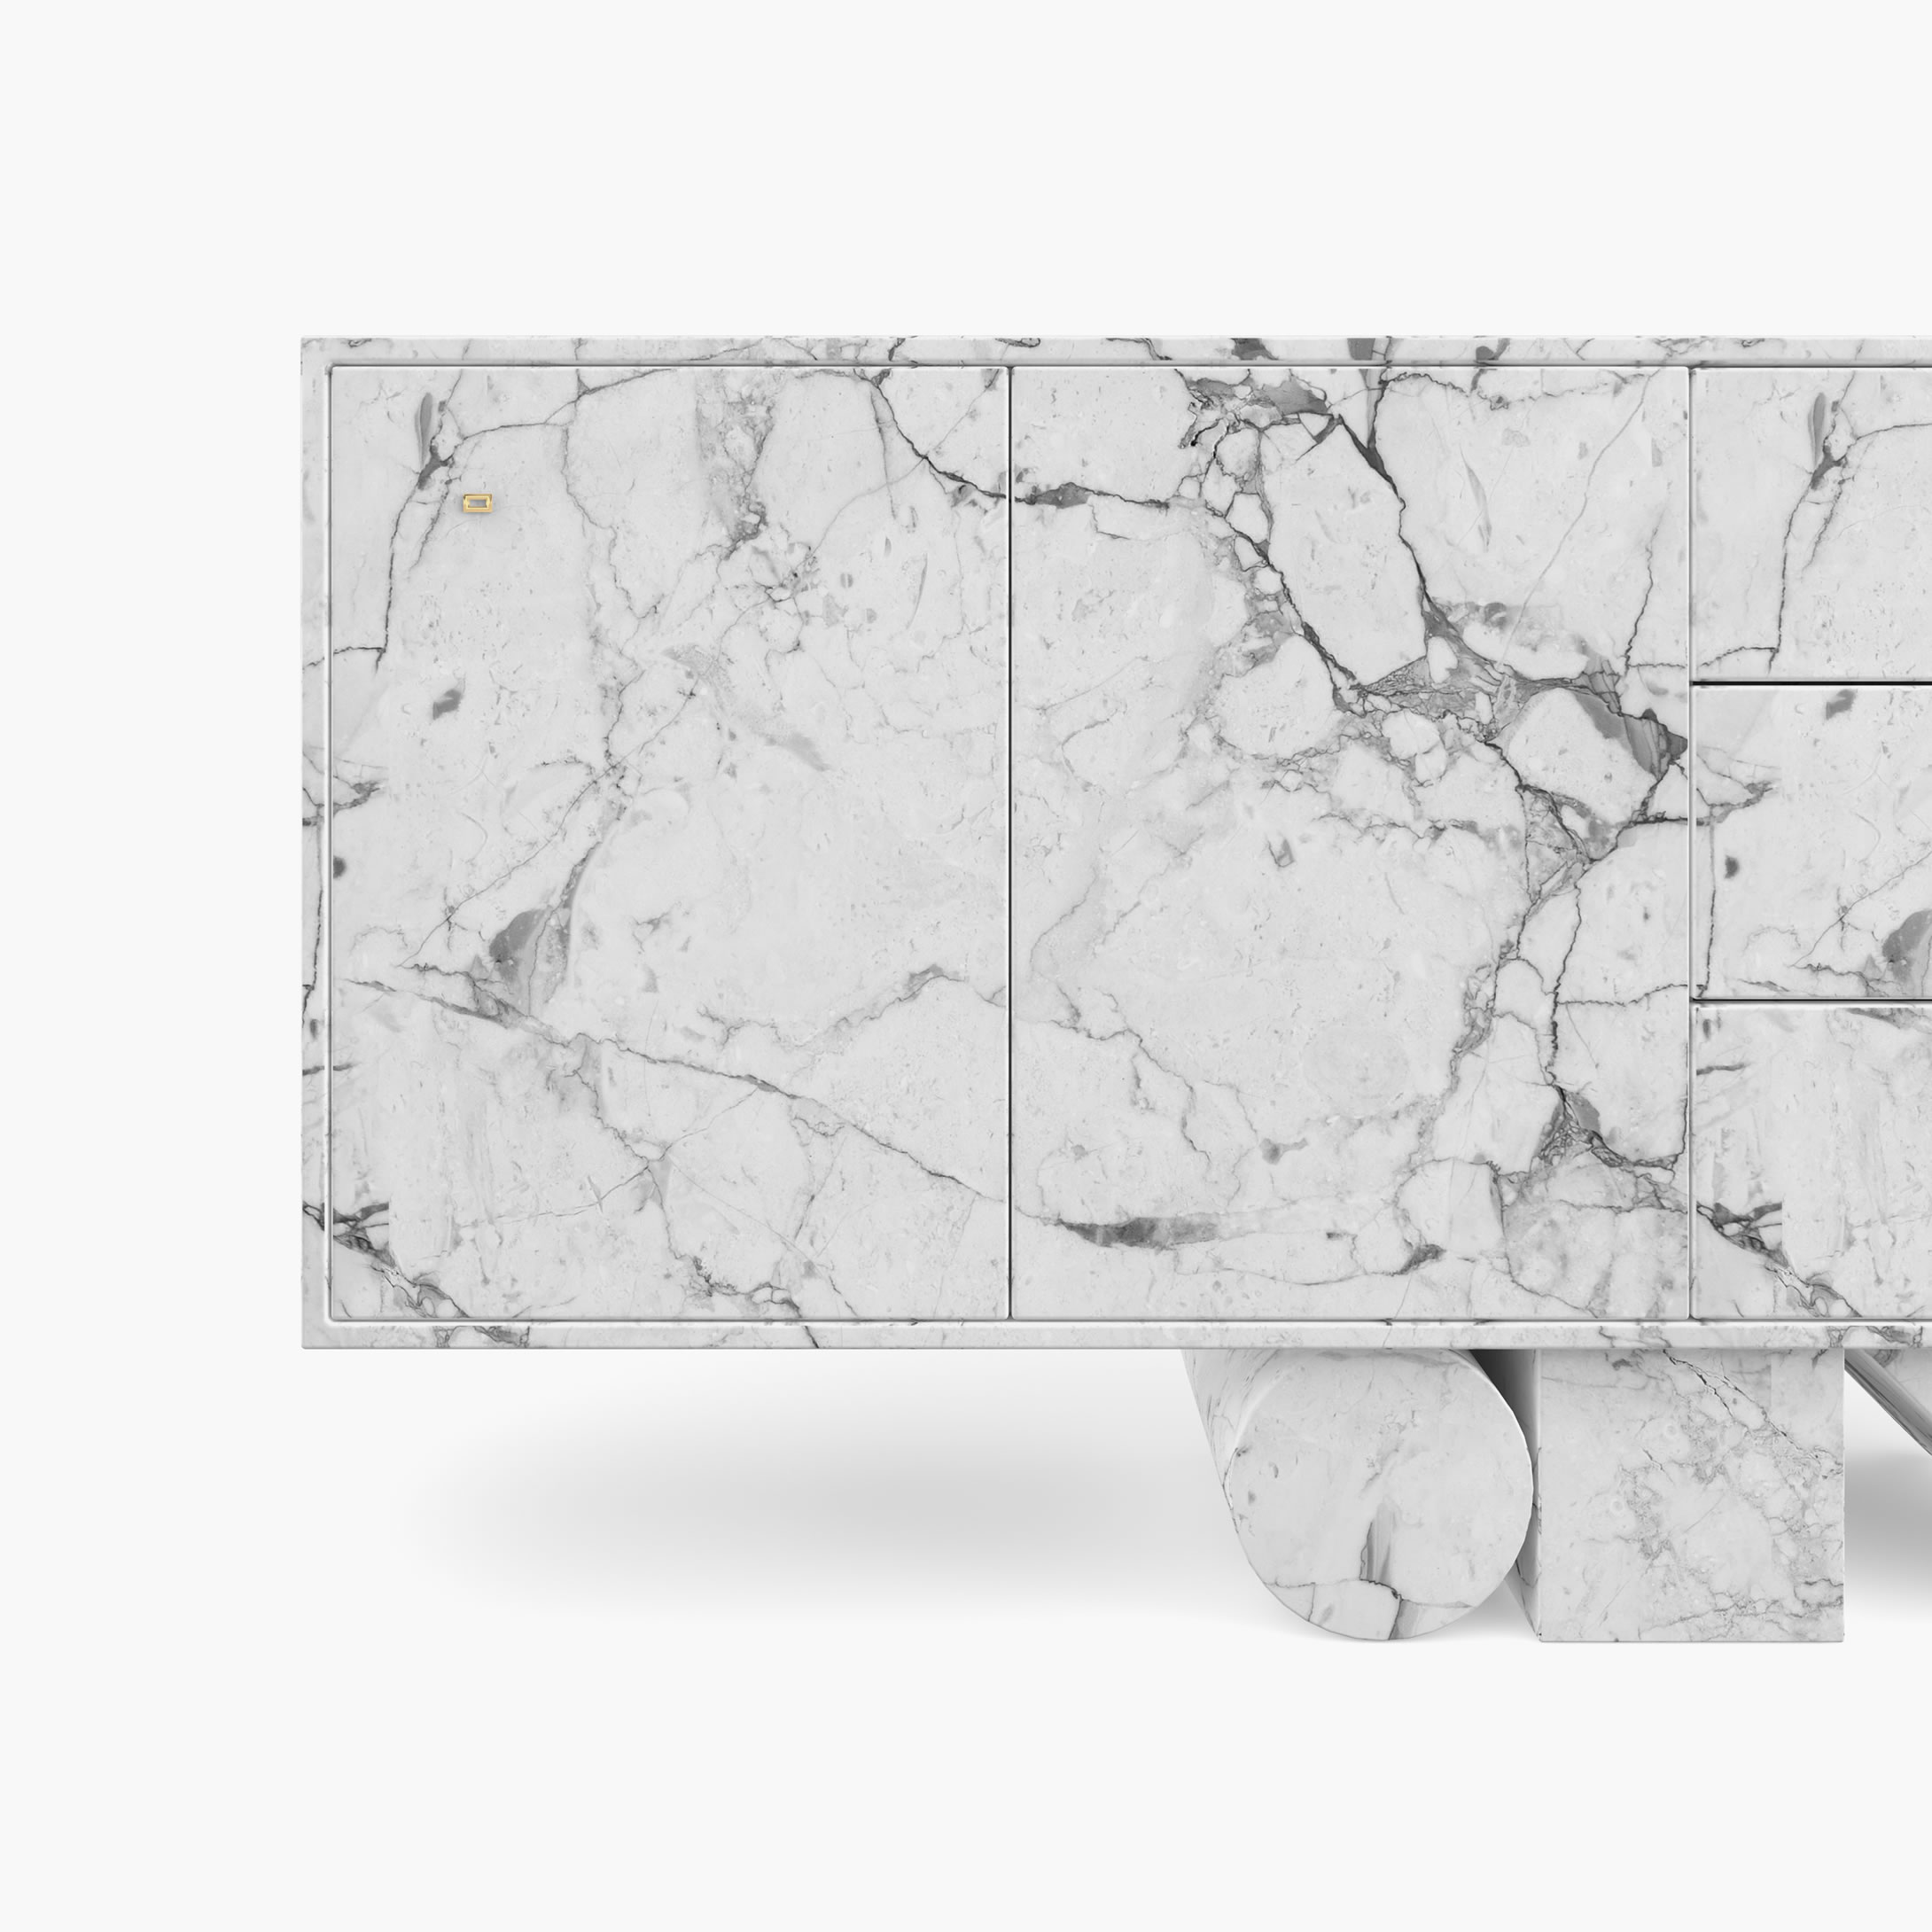 Sideboard Doors drawers White Arabescato Marble pure Living Room masterpieces Consoles  Sideboards FS 4 FELIX SCHWAKE